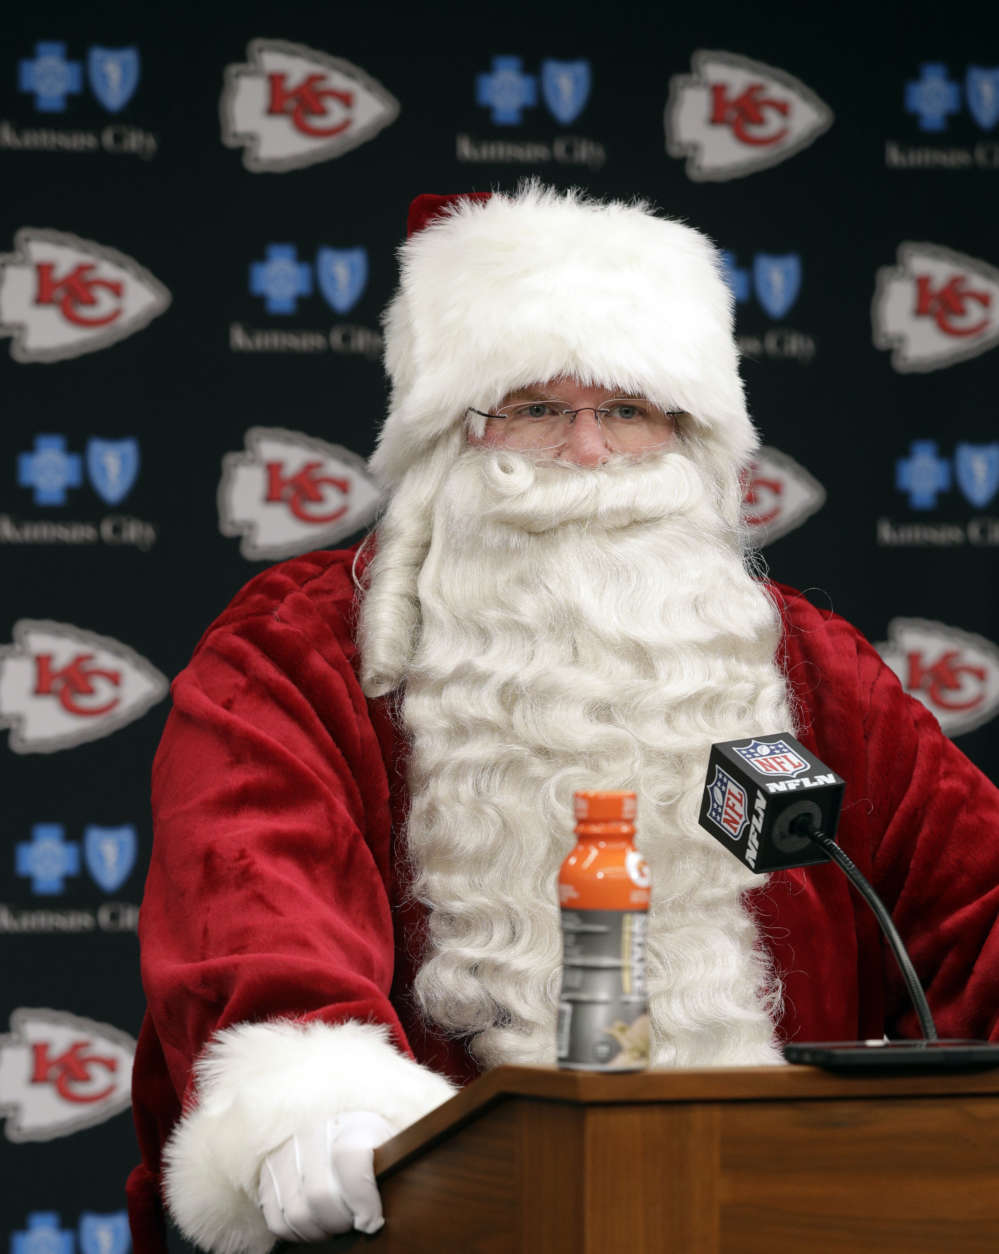 Kansas City Chiefs head coach Andy Reid wears a Santa costume during a news conference following an NFL football game against the Miami Dolphins in Kansas City, Mo., Sunday, Dec. 24, 2017. The Kansas City Chiefs won 29-13. (AP Photo/Orlin Wagner)